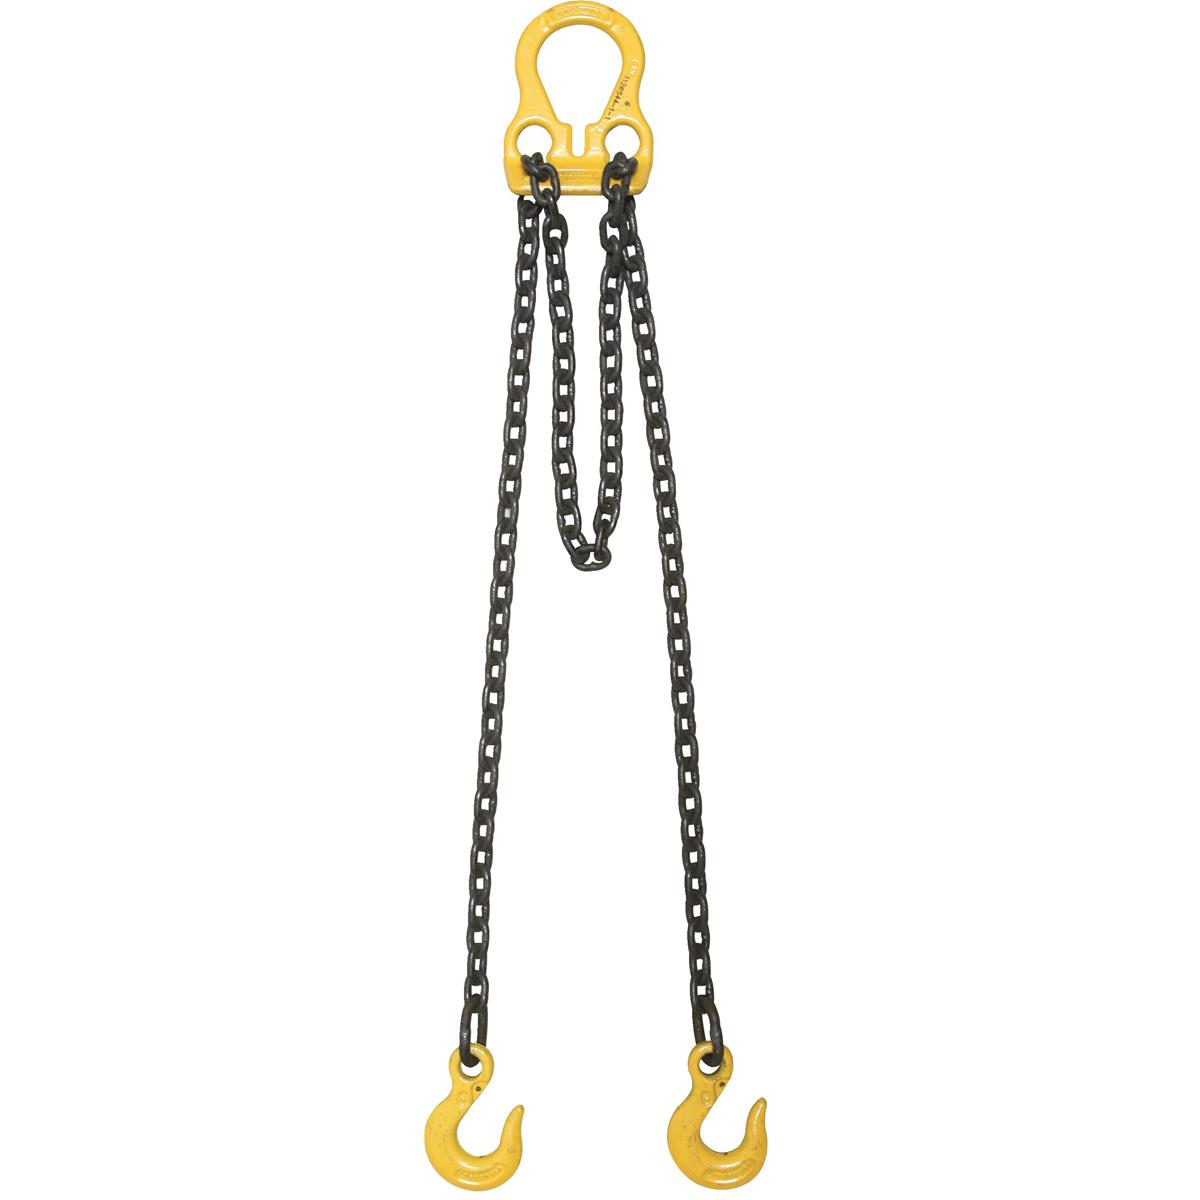 China Supplier of Chain slings6.jpg